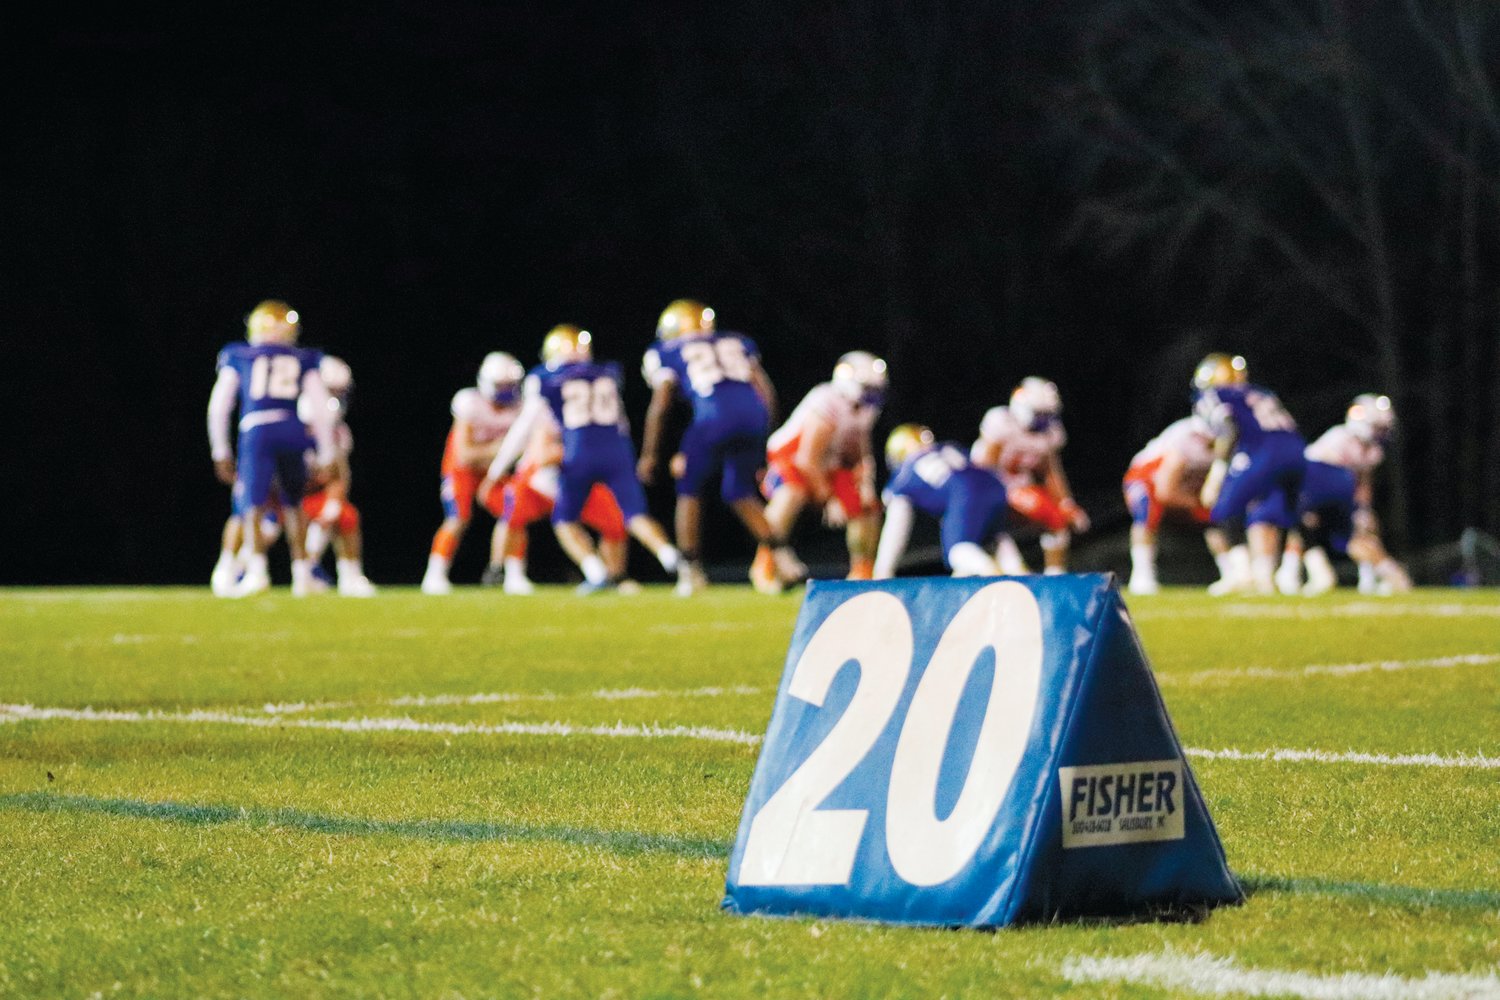 The view from the 20-yard-line marker during the Jordan-Matthews Jets' home game against Randleman last March. The new 14U Siler City Jets will play their games at Jordan-Matthews' football stadium.